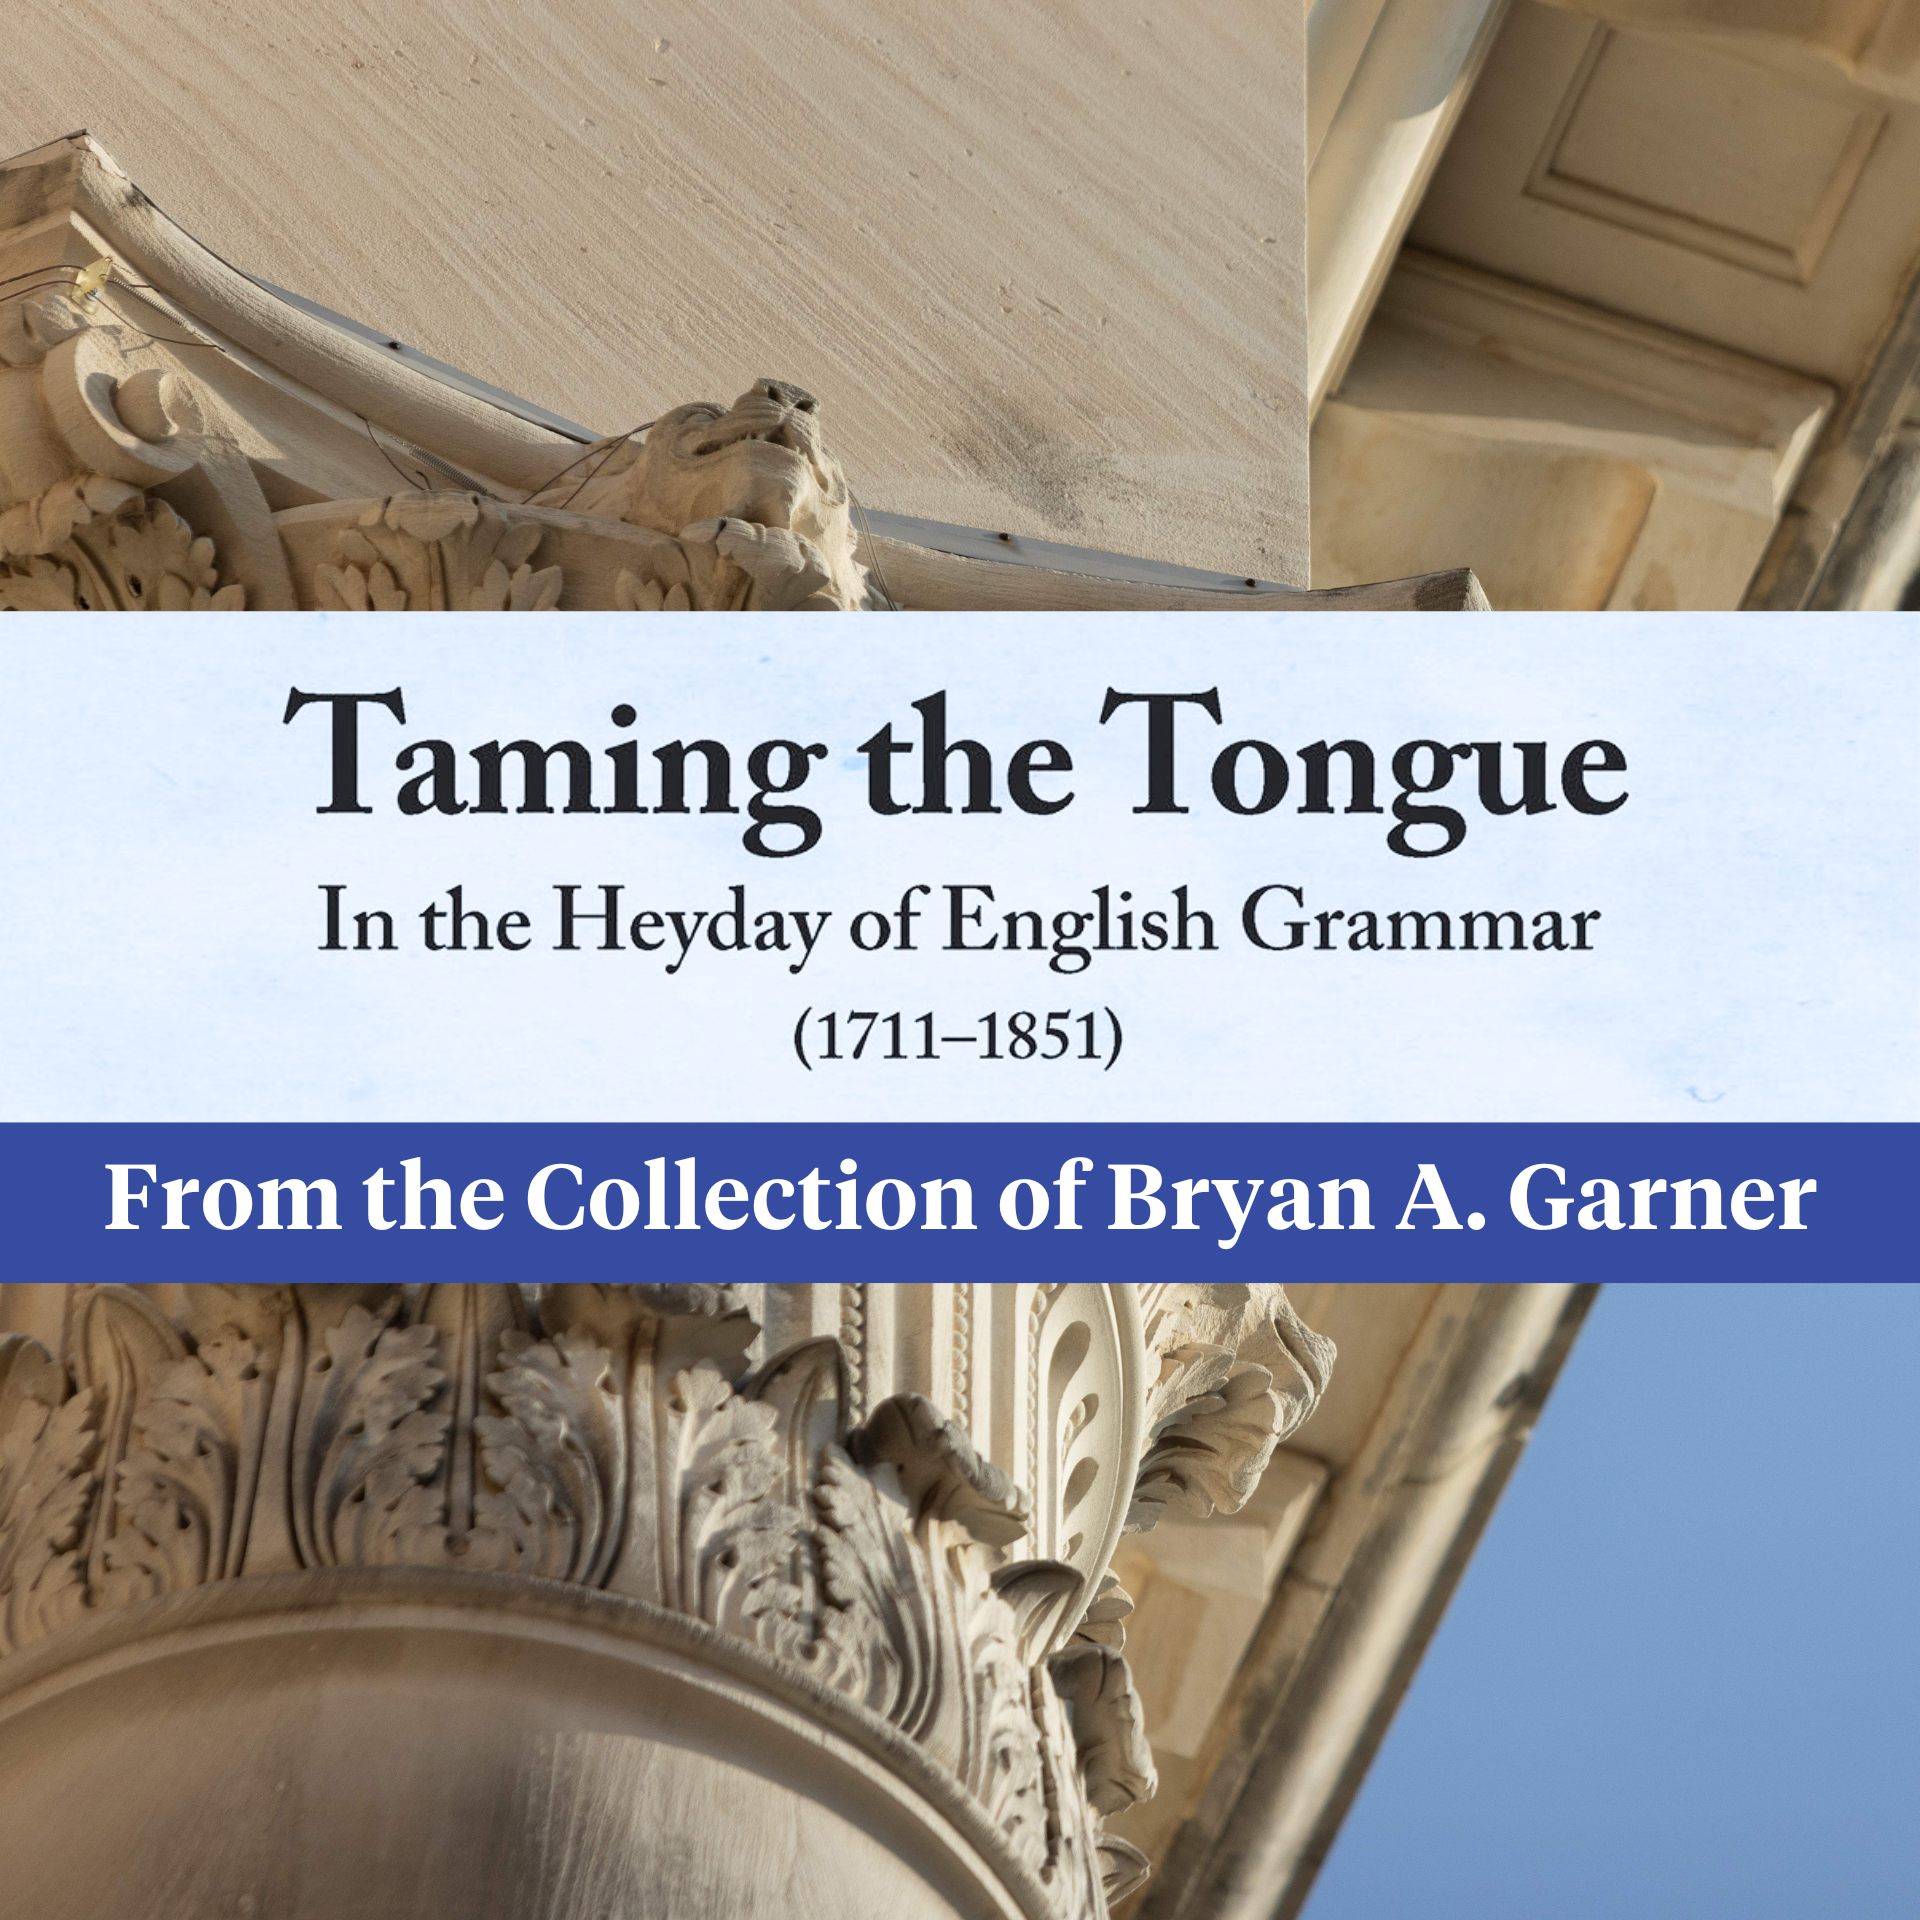 Taming the Tongue exhibit image